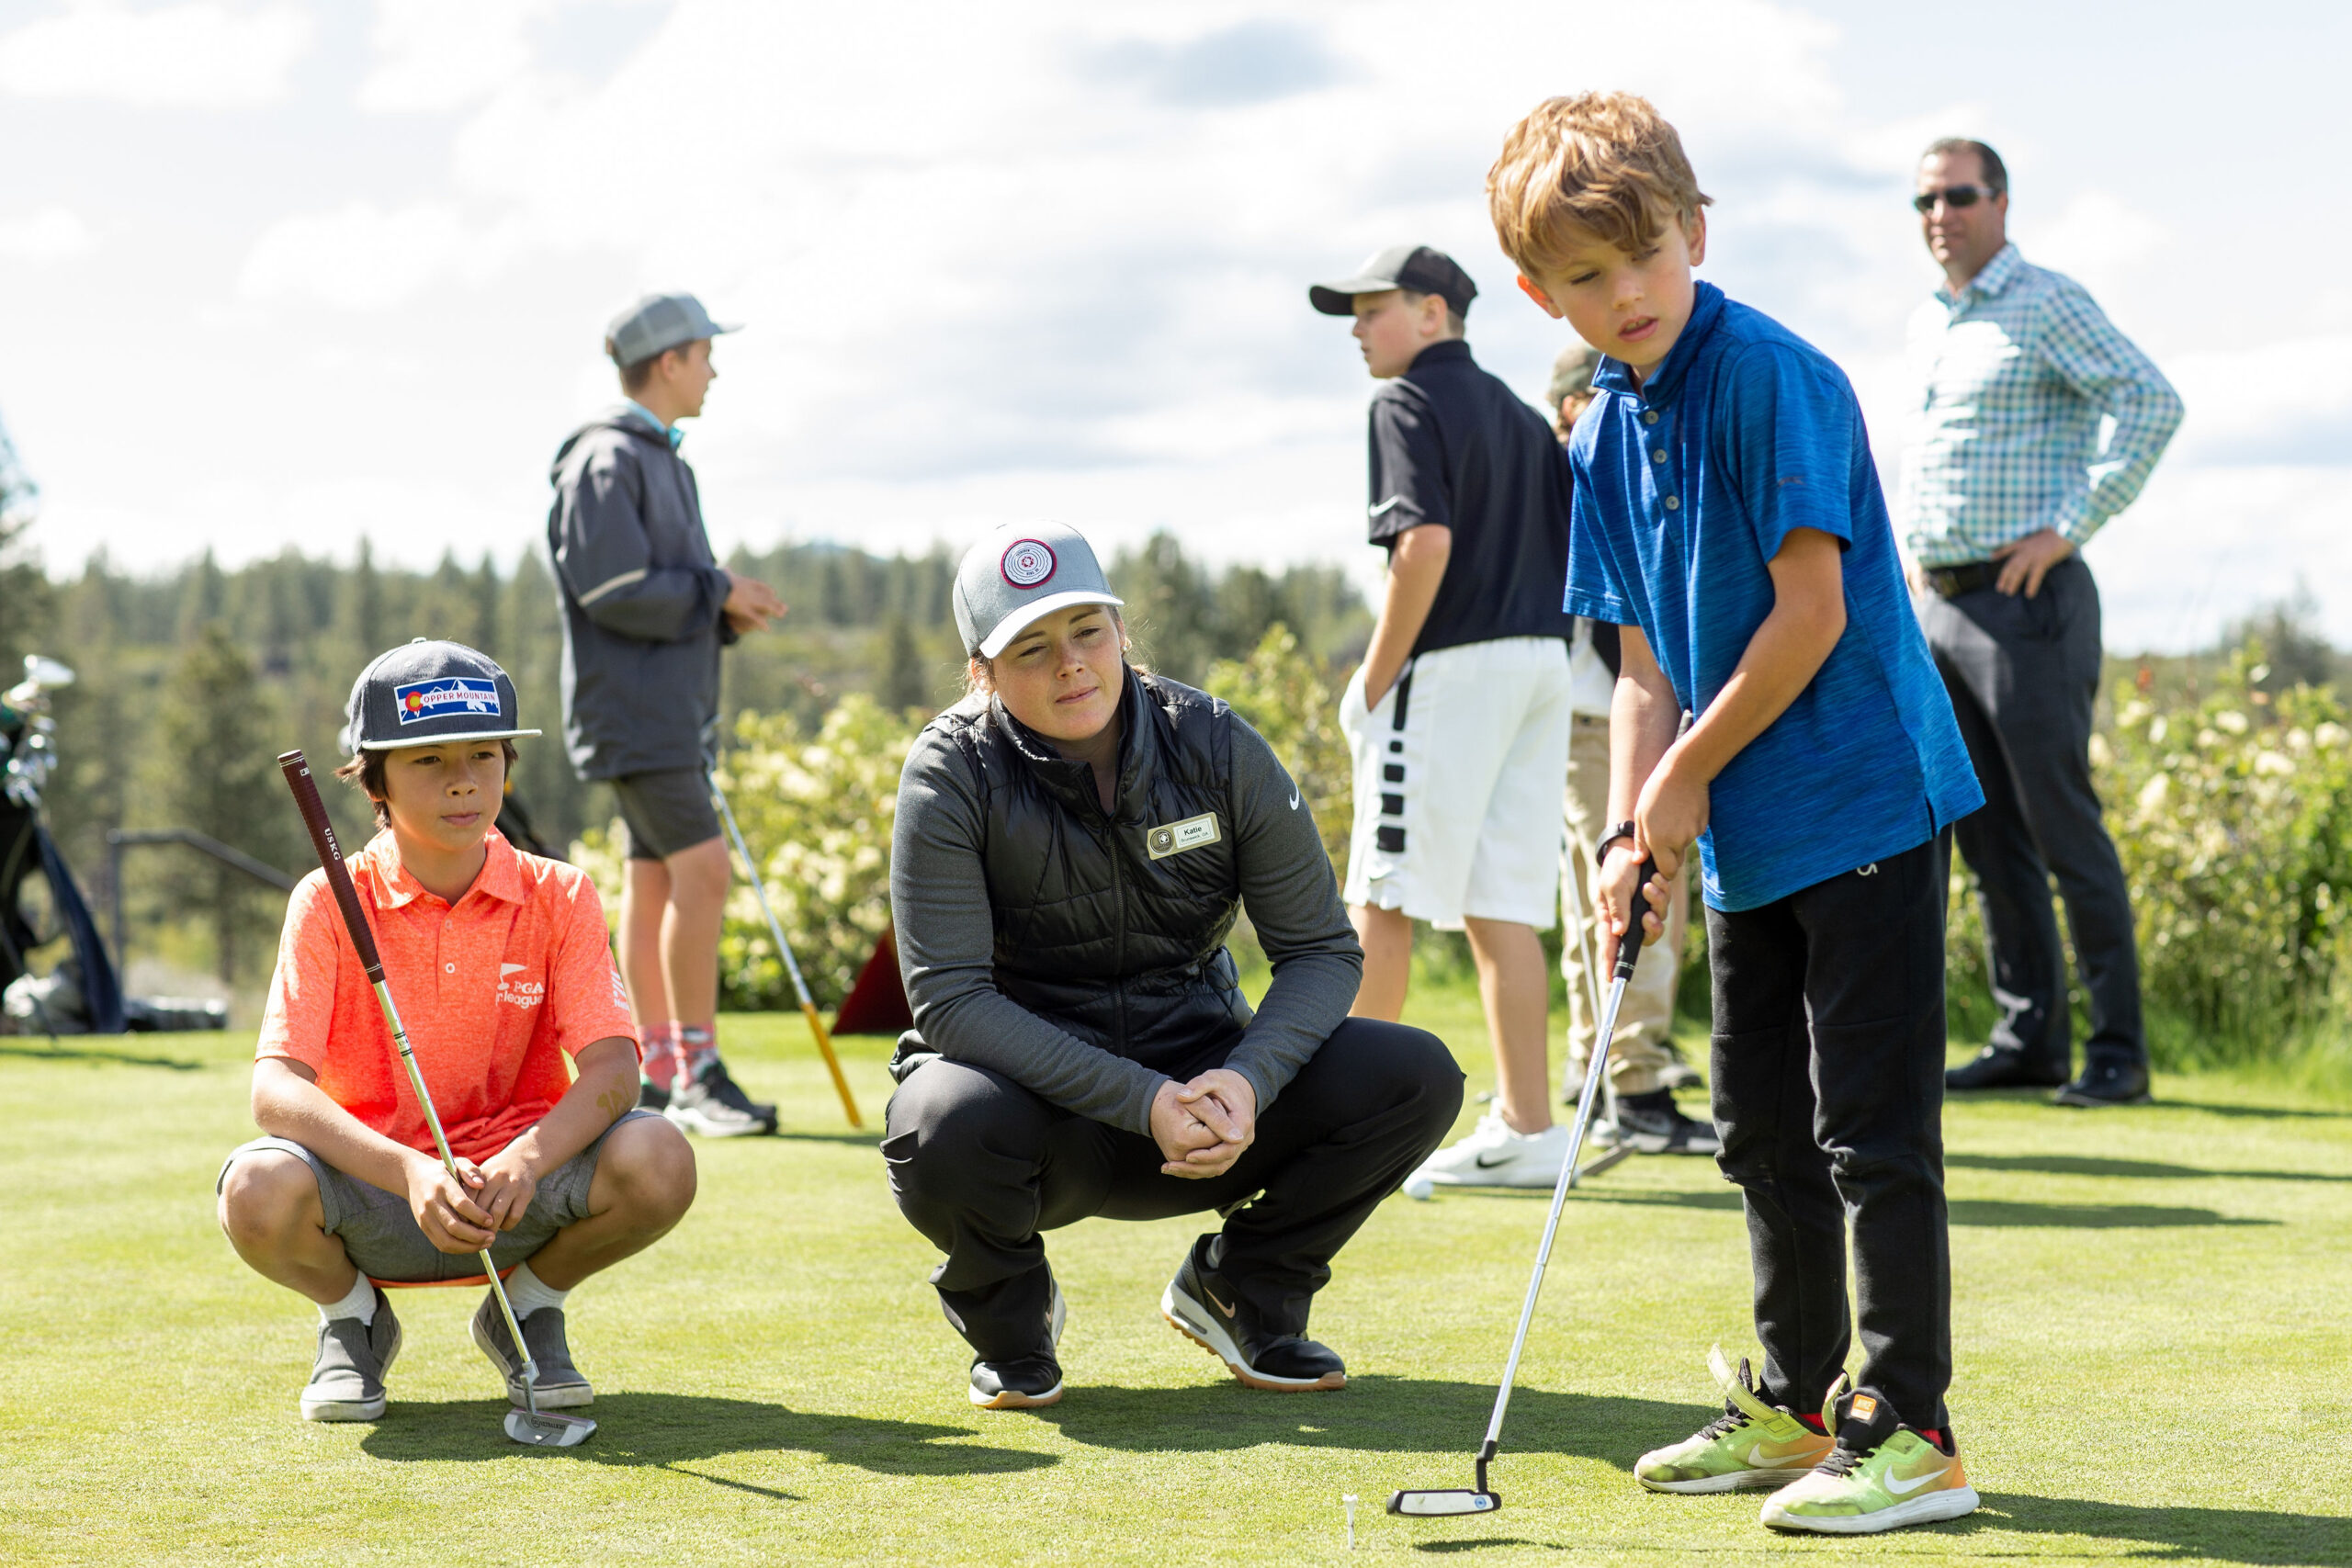 Teaching your kids to golf and realistic expectations